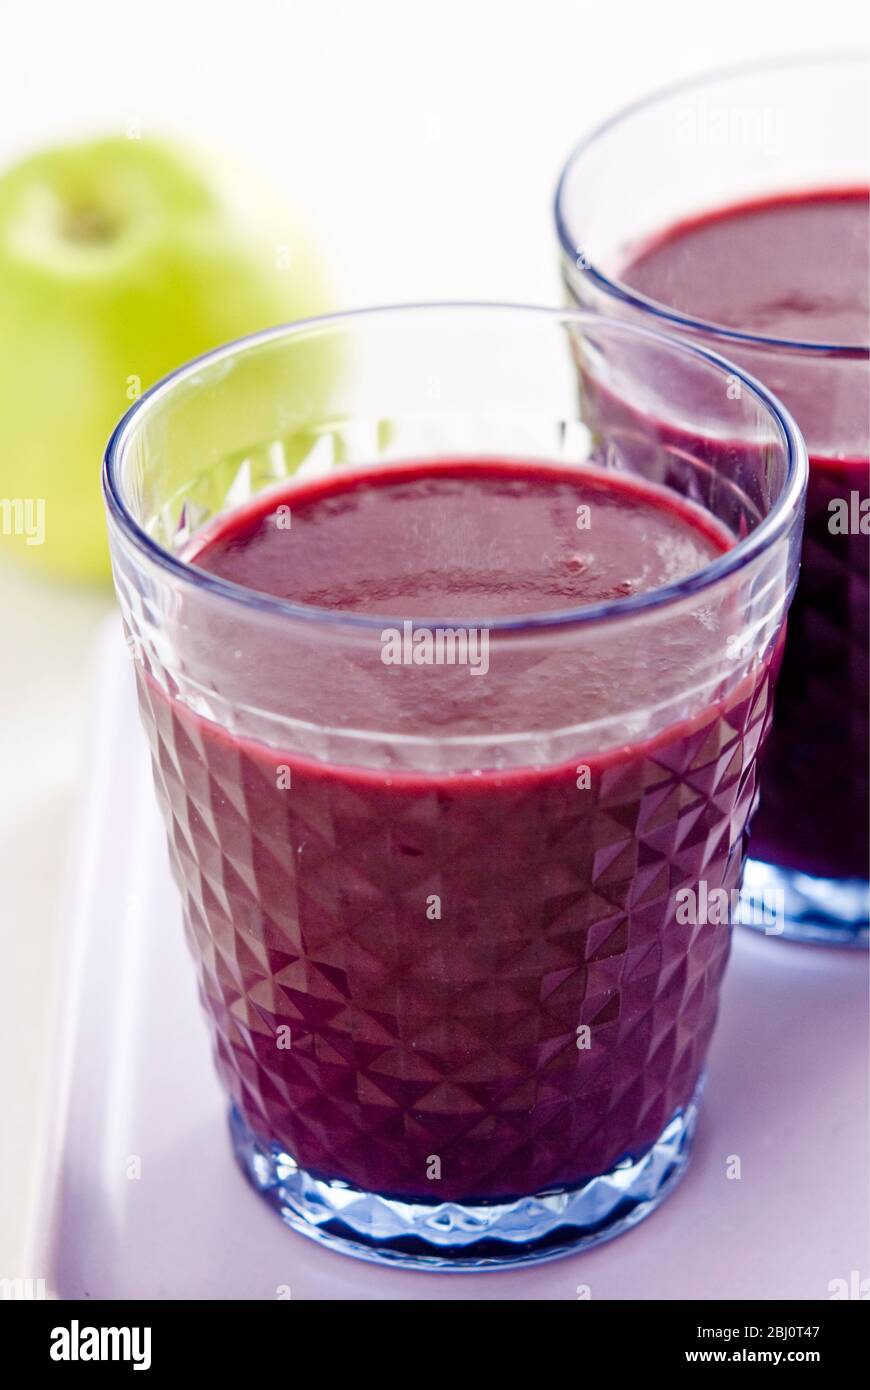 Healthy snack of freshly made blackcurrant and raspberry smoothie with fresh green apple - Stock Photo